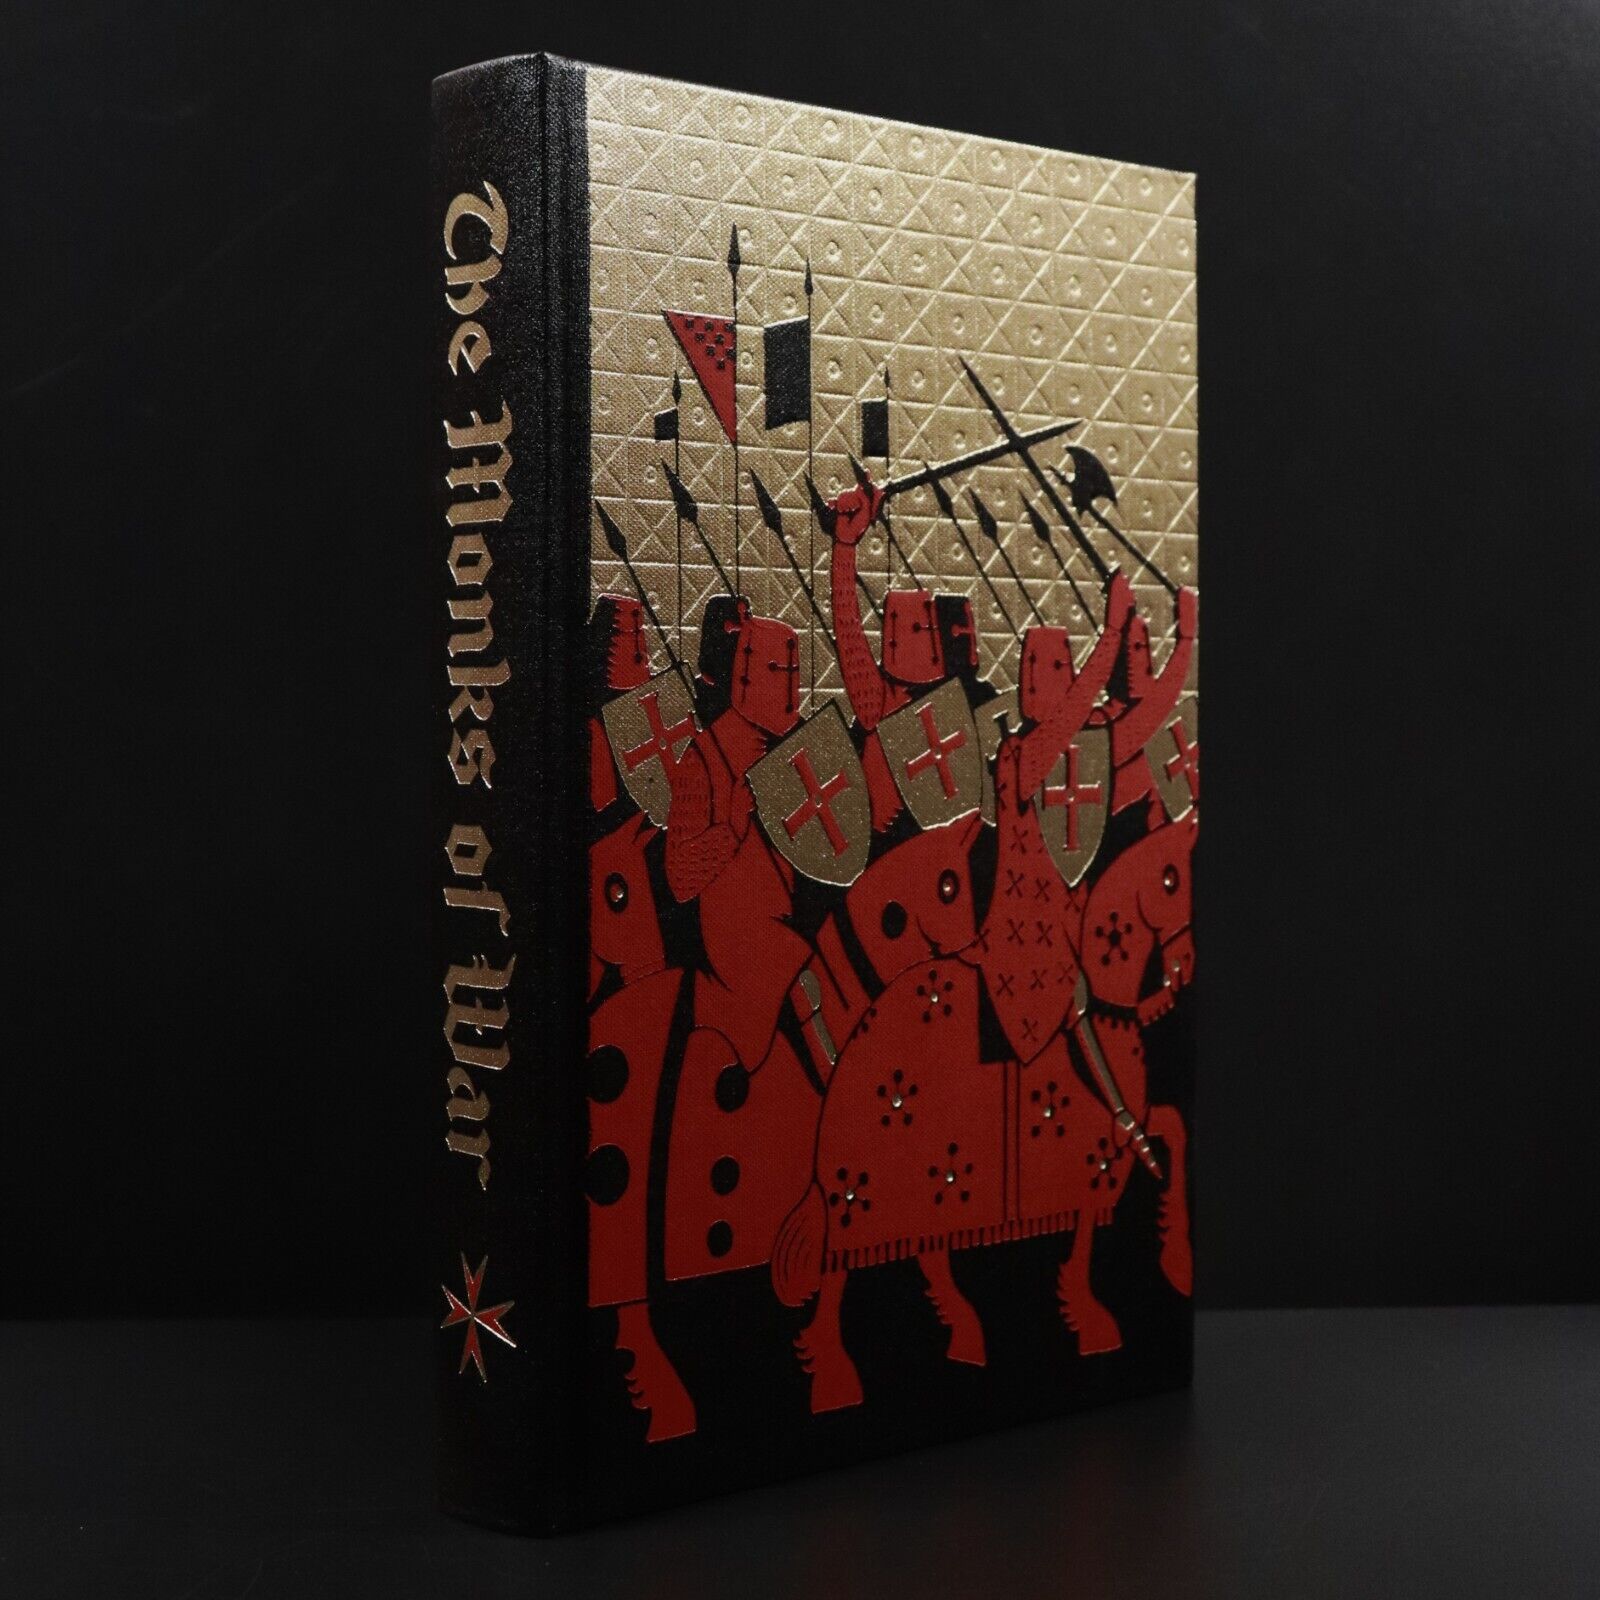 2003 The Monks Of War by Desmond Seward Folio Society Military History Book